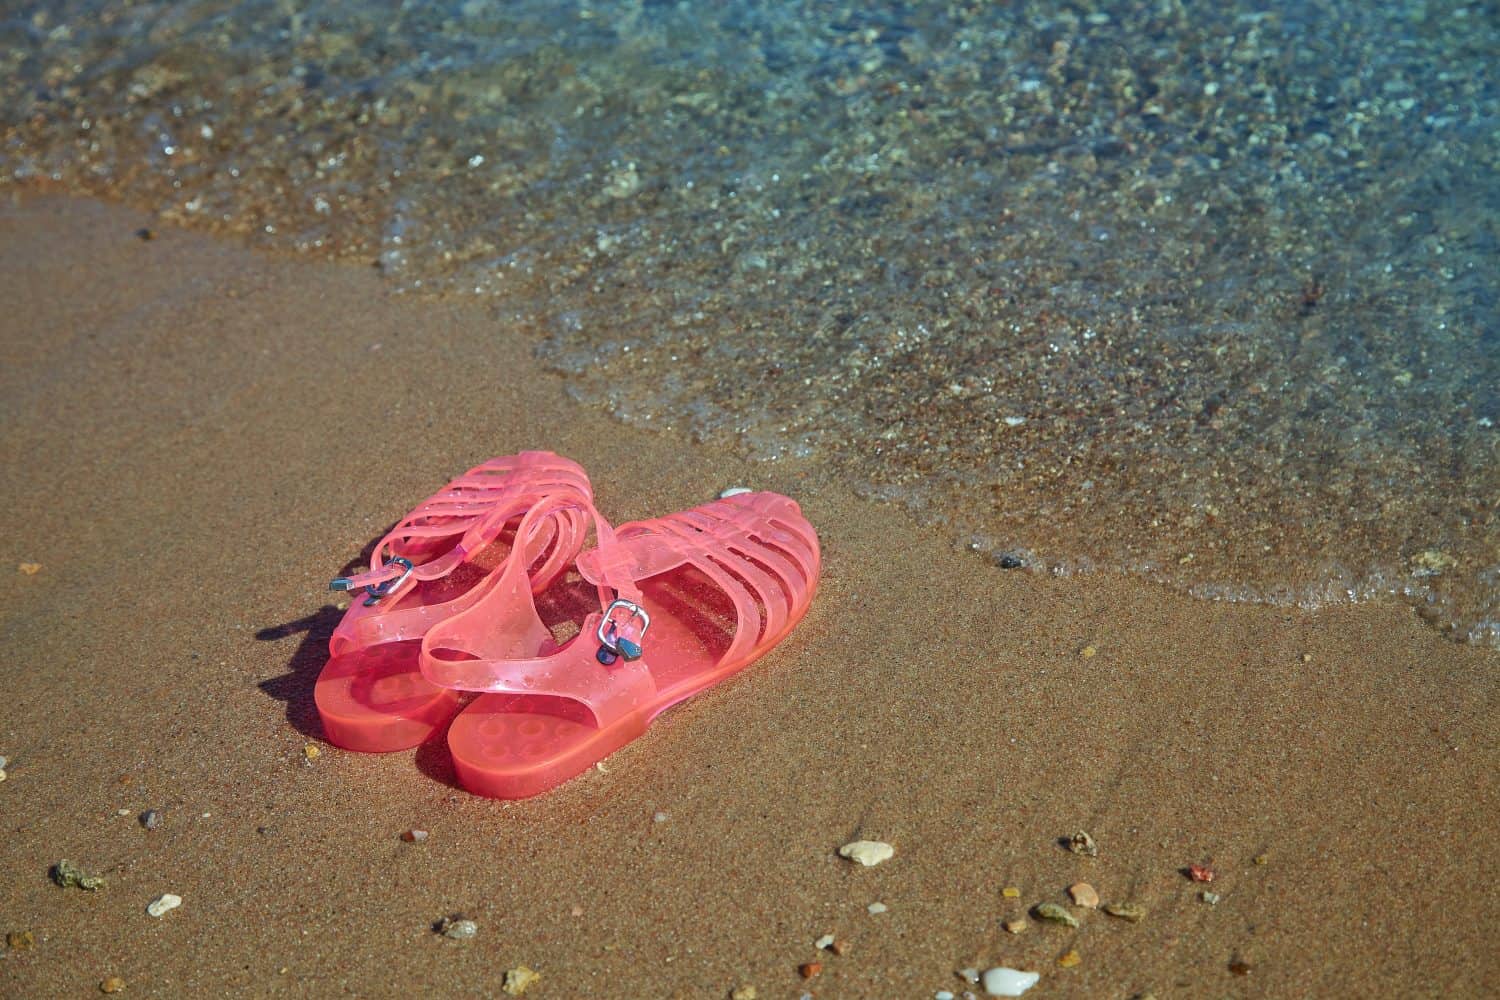 Pink Women's JELLY SANDALS on a sea shore. LADIES FLAT JELLIES SUMMER BEACH SHOES. Sand background